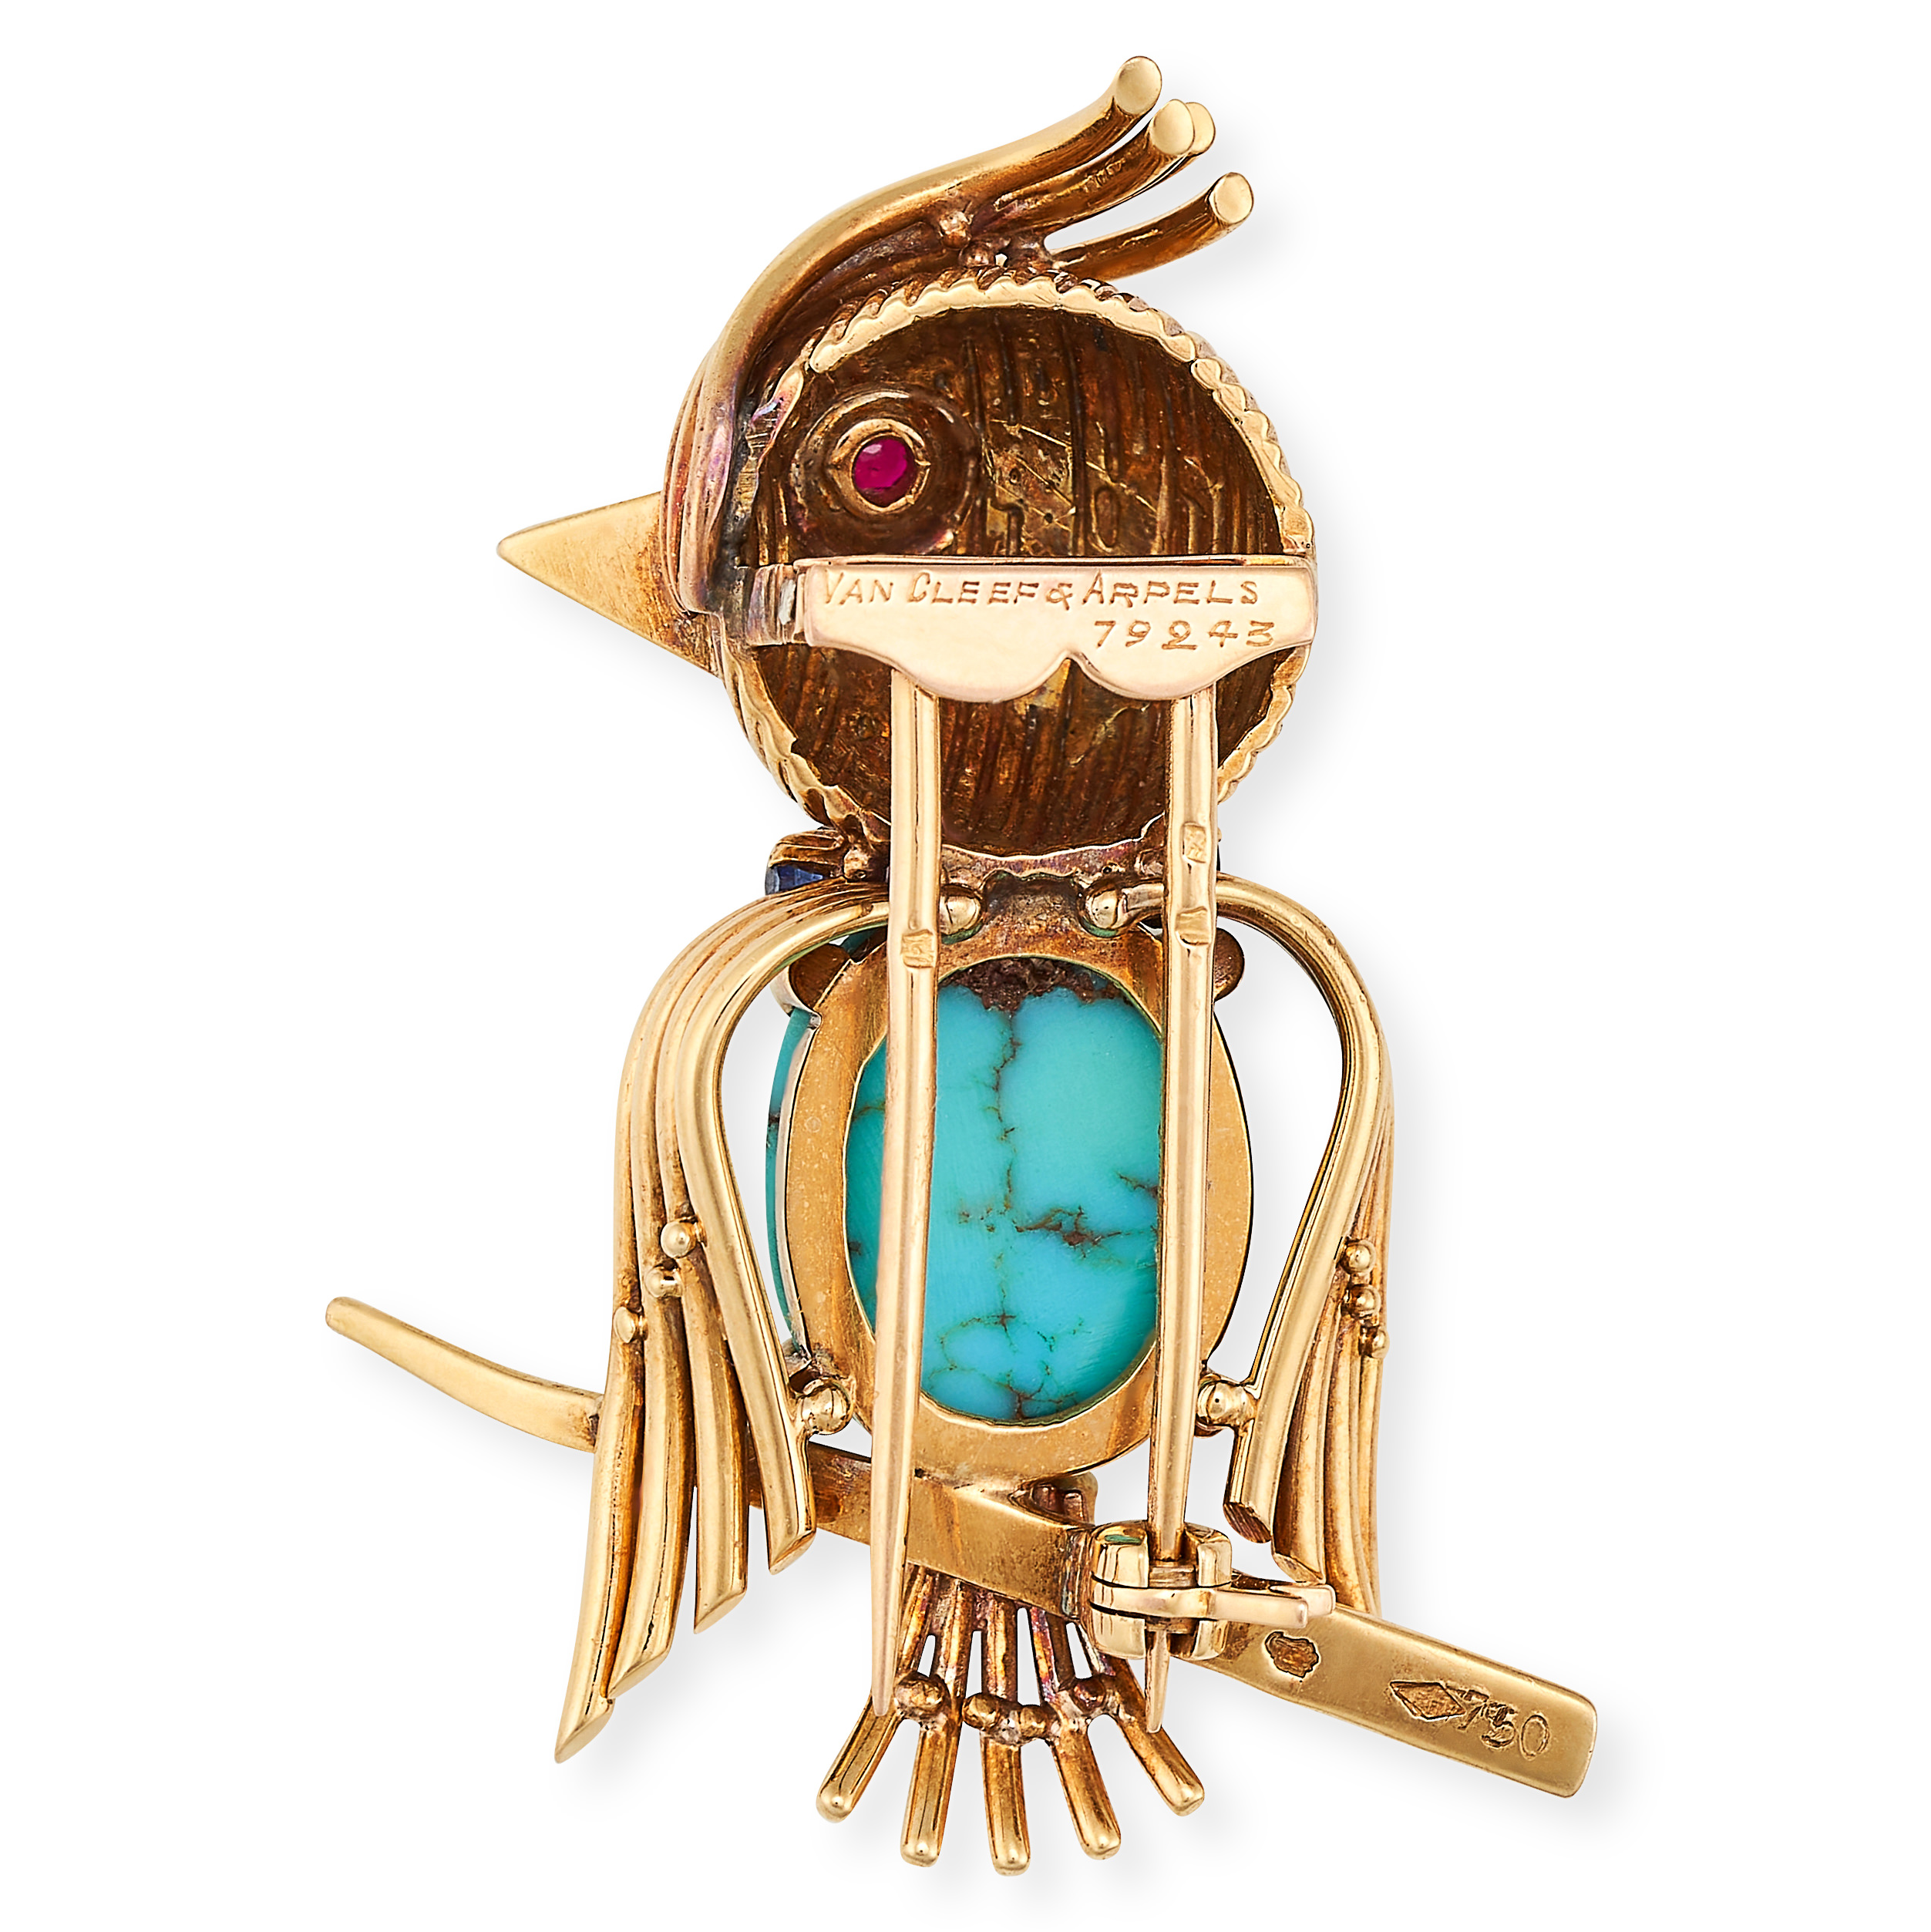 VAN CLEEF & ARPELS, A VINTAGE TURQUOISE, SAPPHIRE AND RUBY BIRD BROOCH in 18ct yellow gold, designed - Image 2 of 2